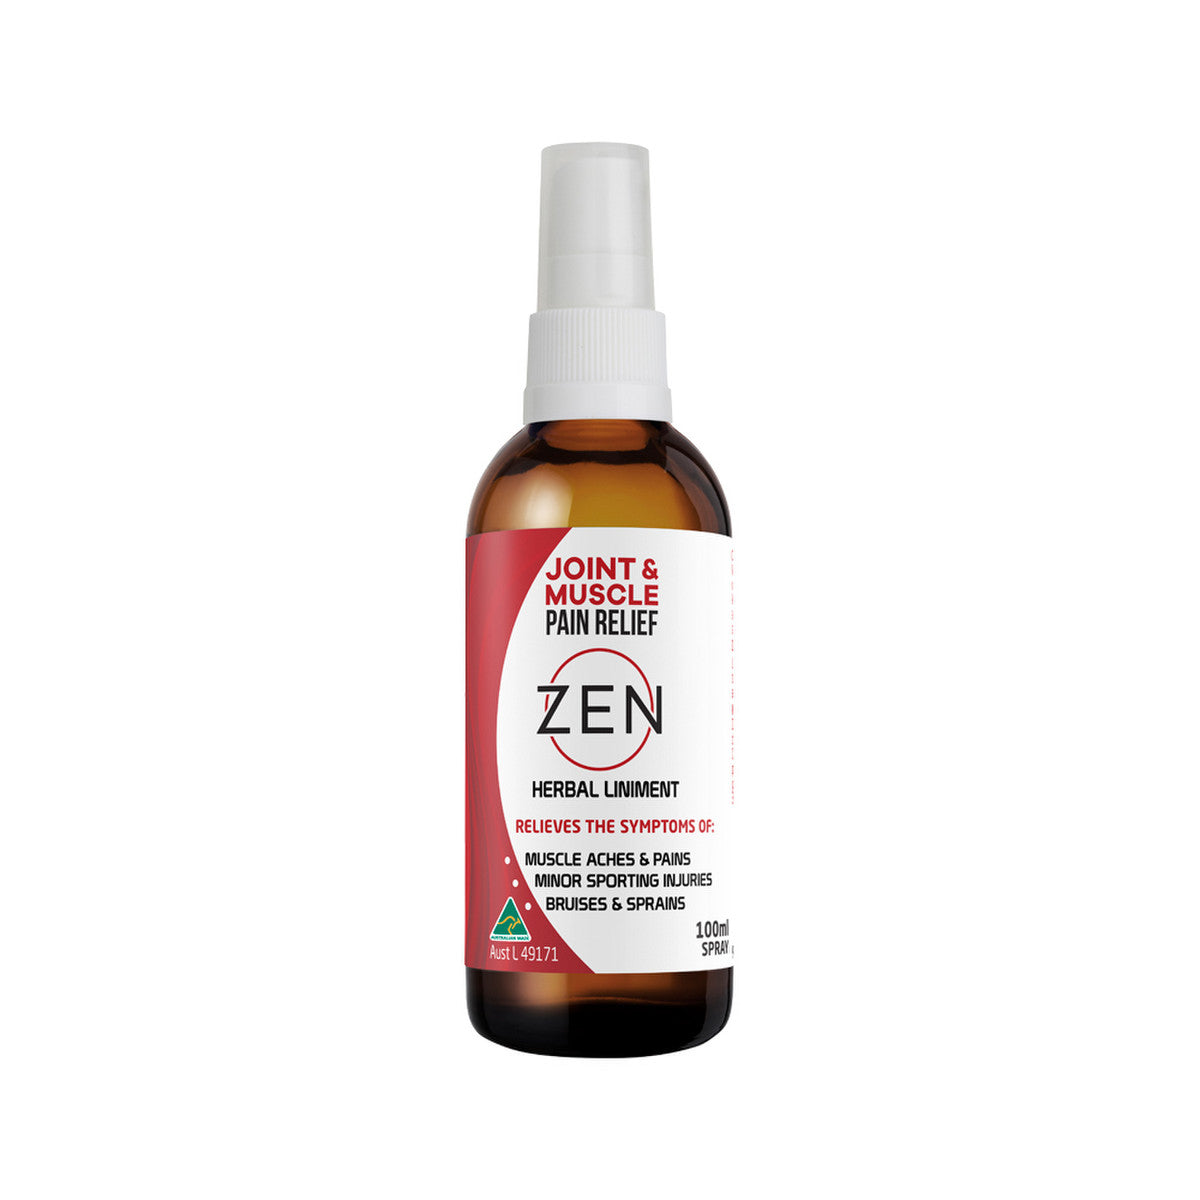 Zen Herbal Liniment (J and M Pain Relief) 100ml Spray